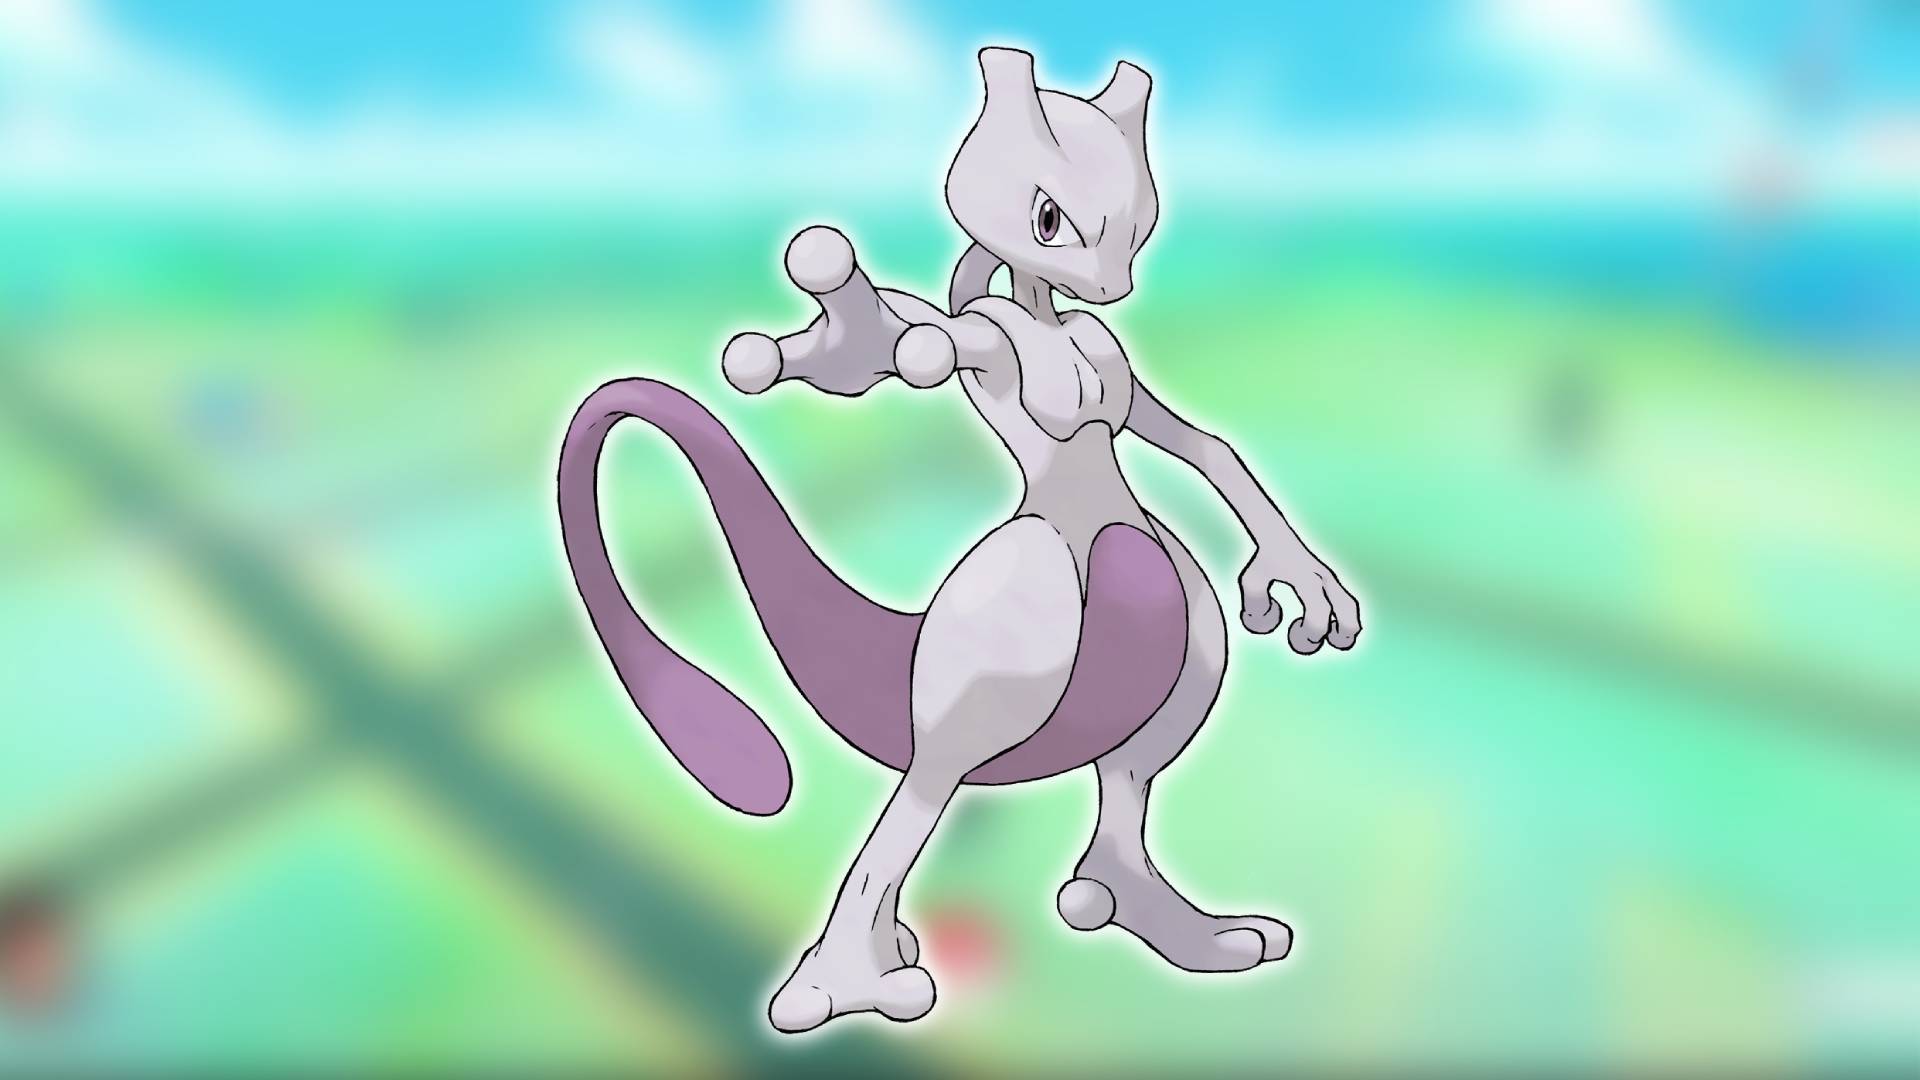 Mewtwo is one of the most beloved Pokémon by the community